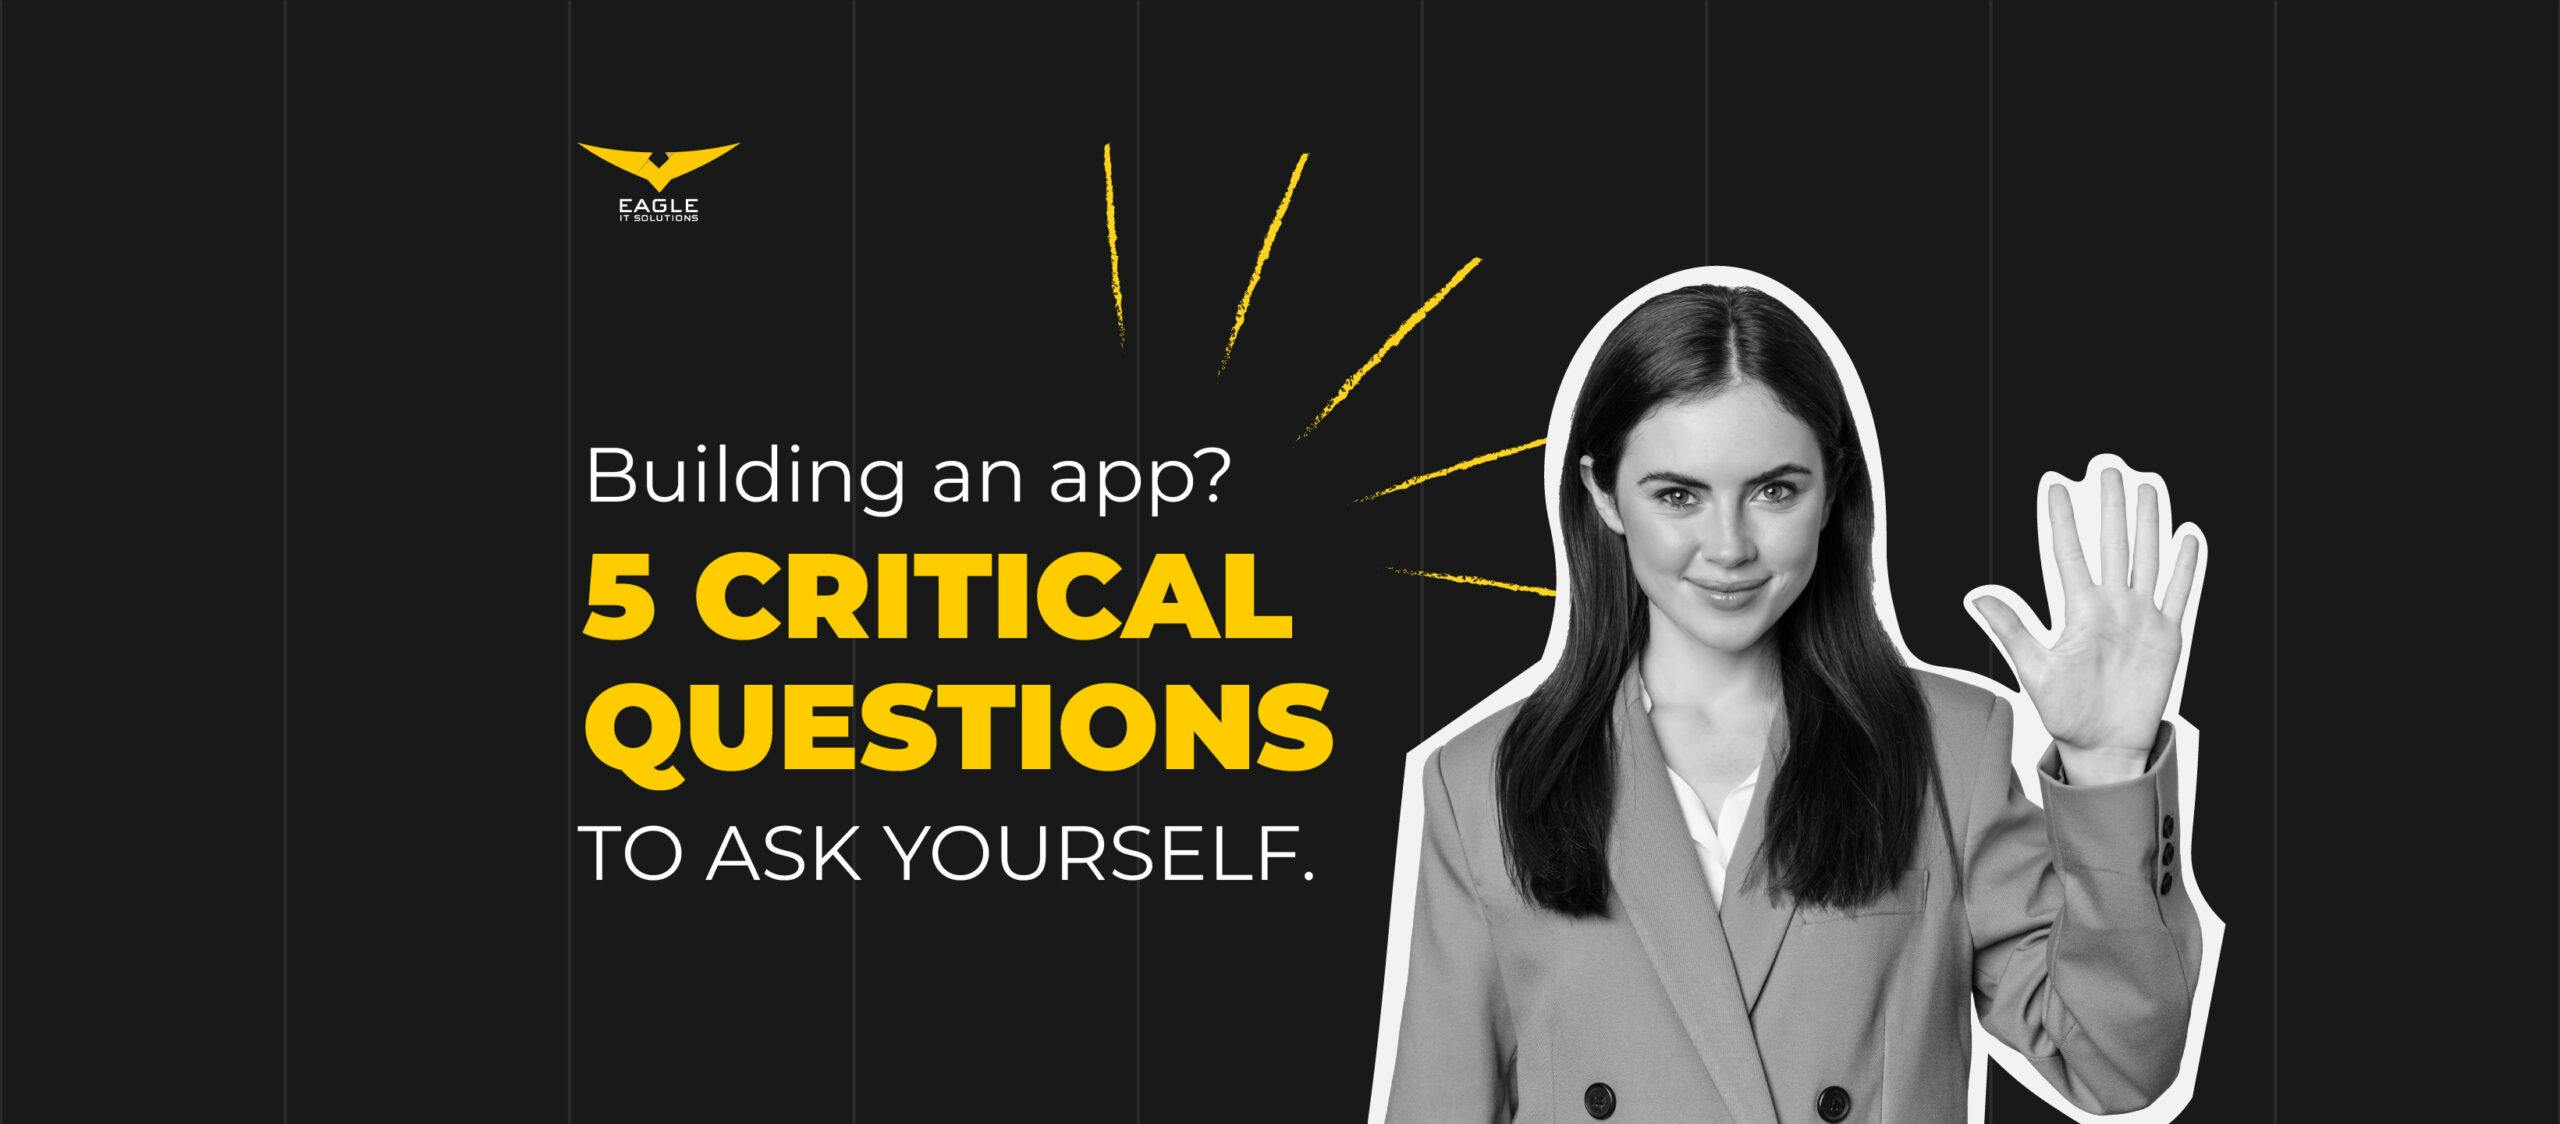 Building an App? 5 Critical Questions to Ask Yourself  